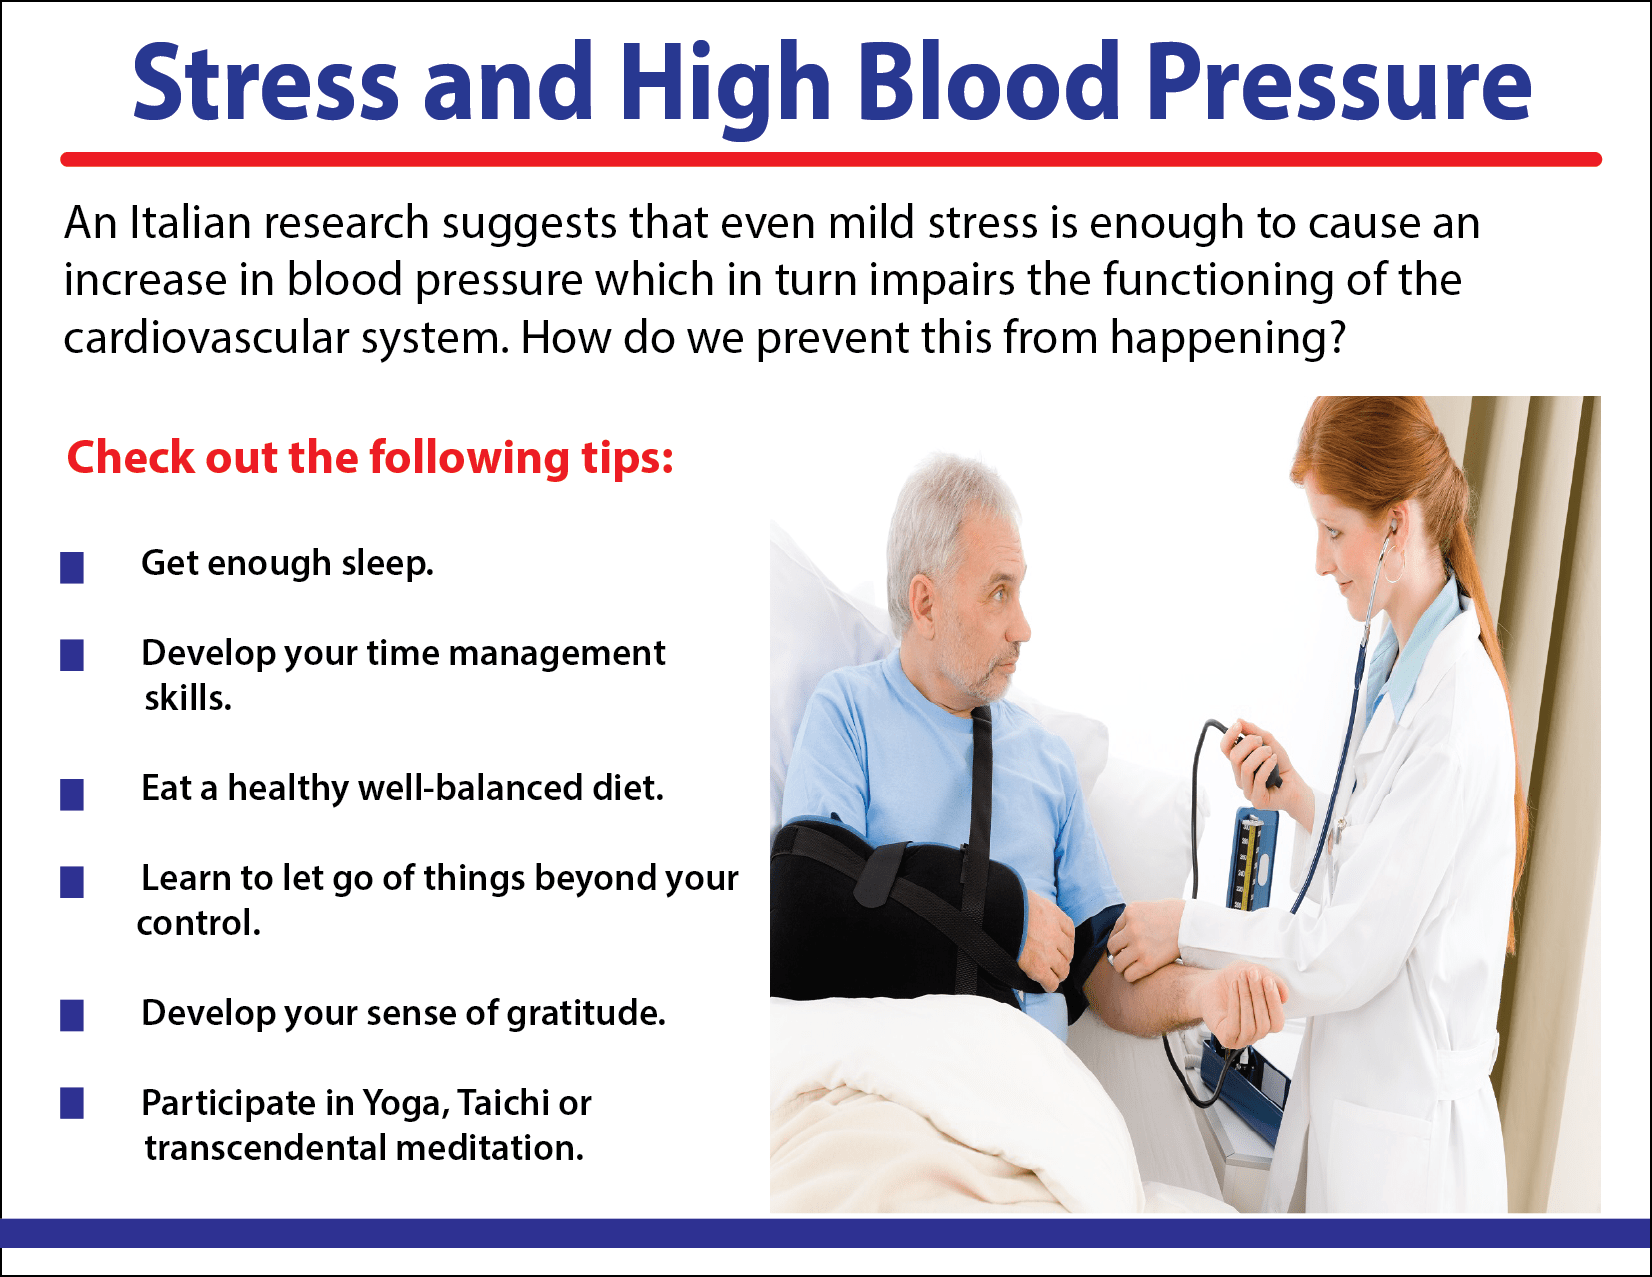 Stress and high blood pressure